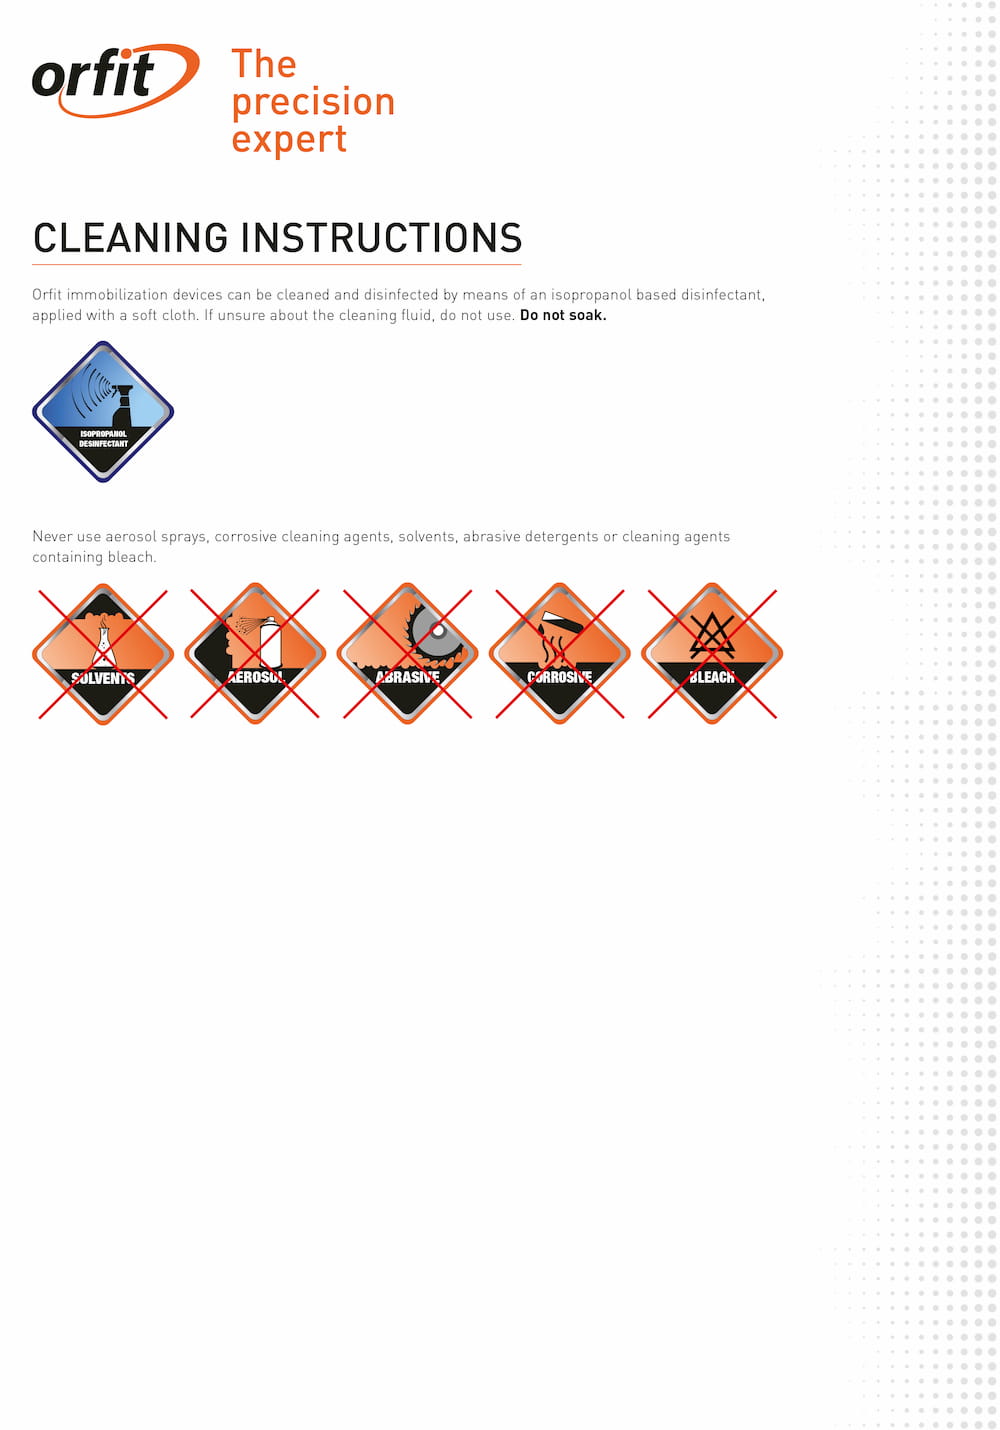 Cleaning guide to clean and disinfect Orfit Products